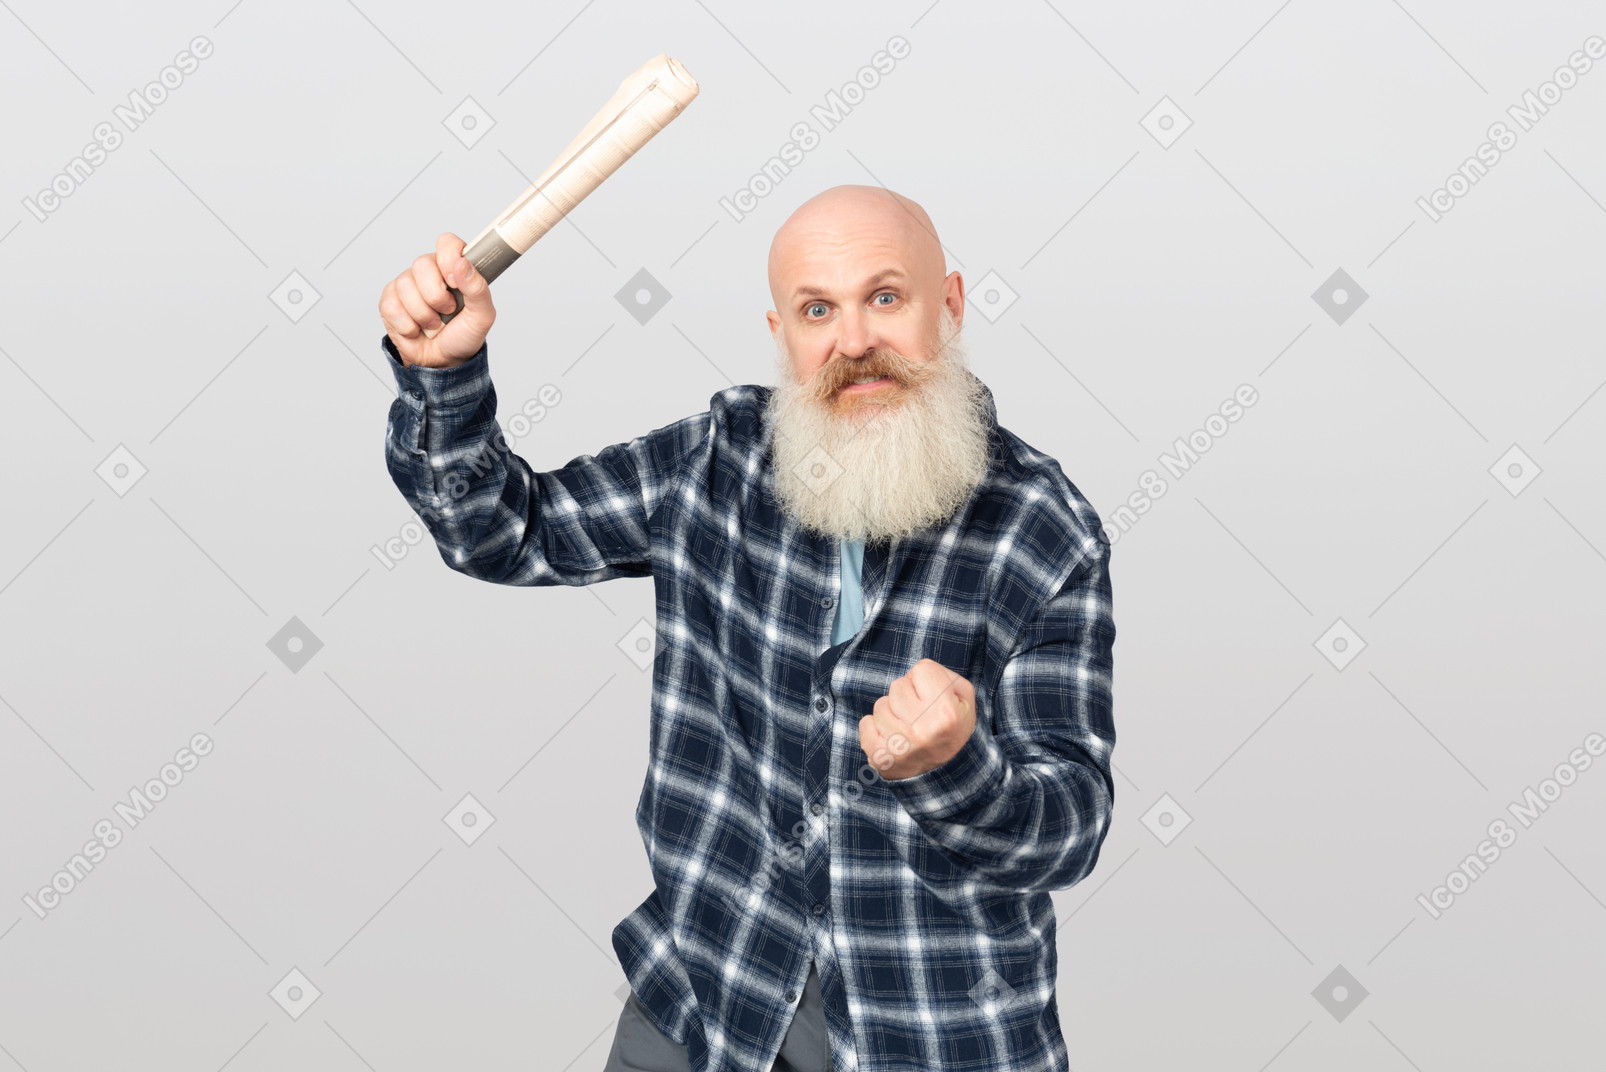 Bearded man holding a rolled newspaper